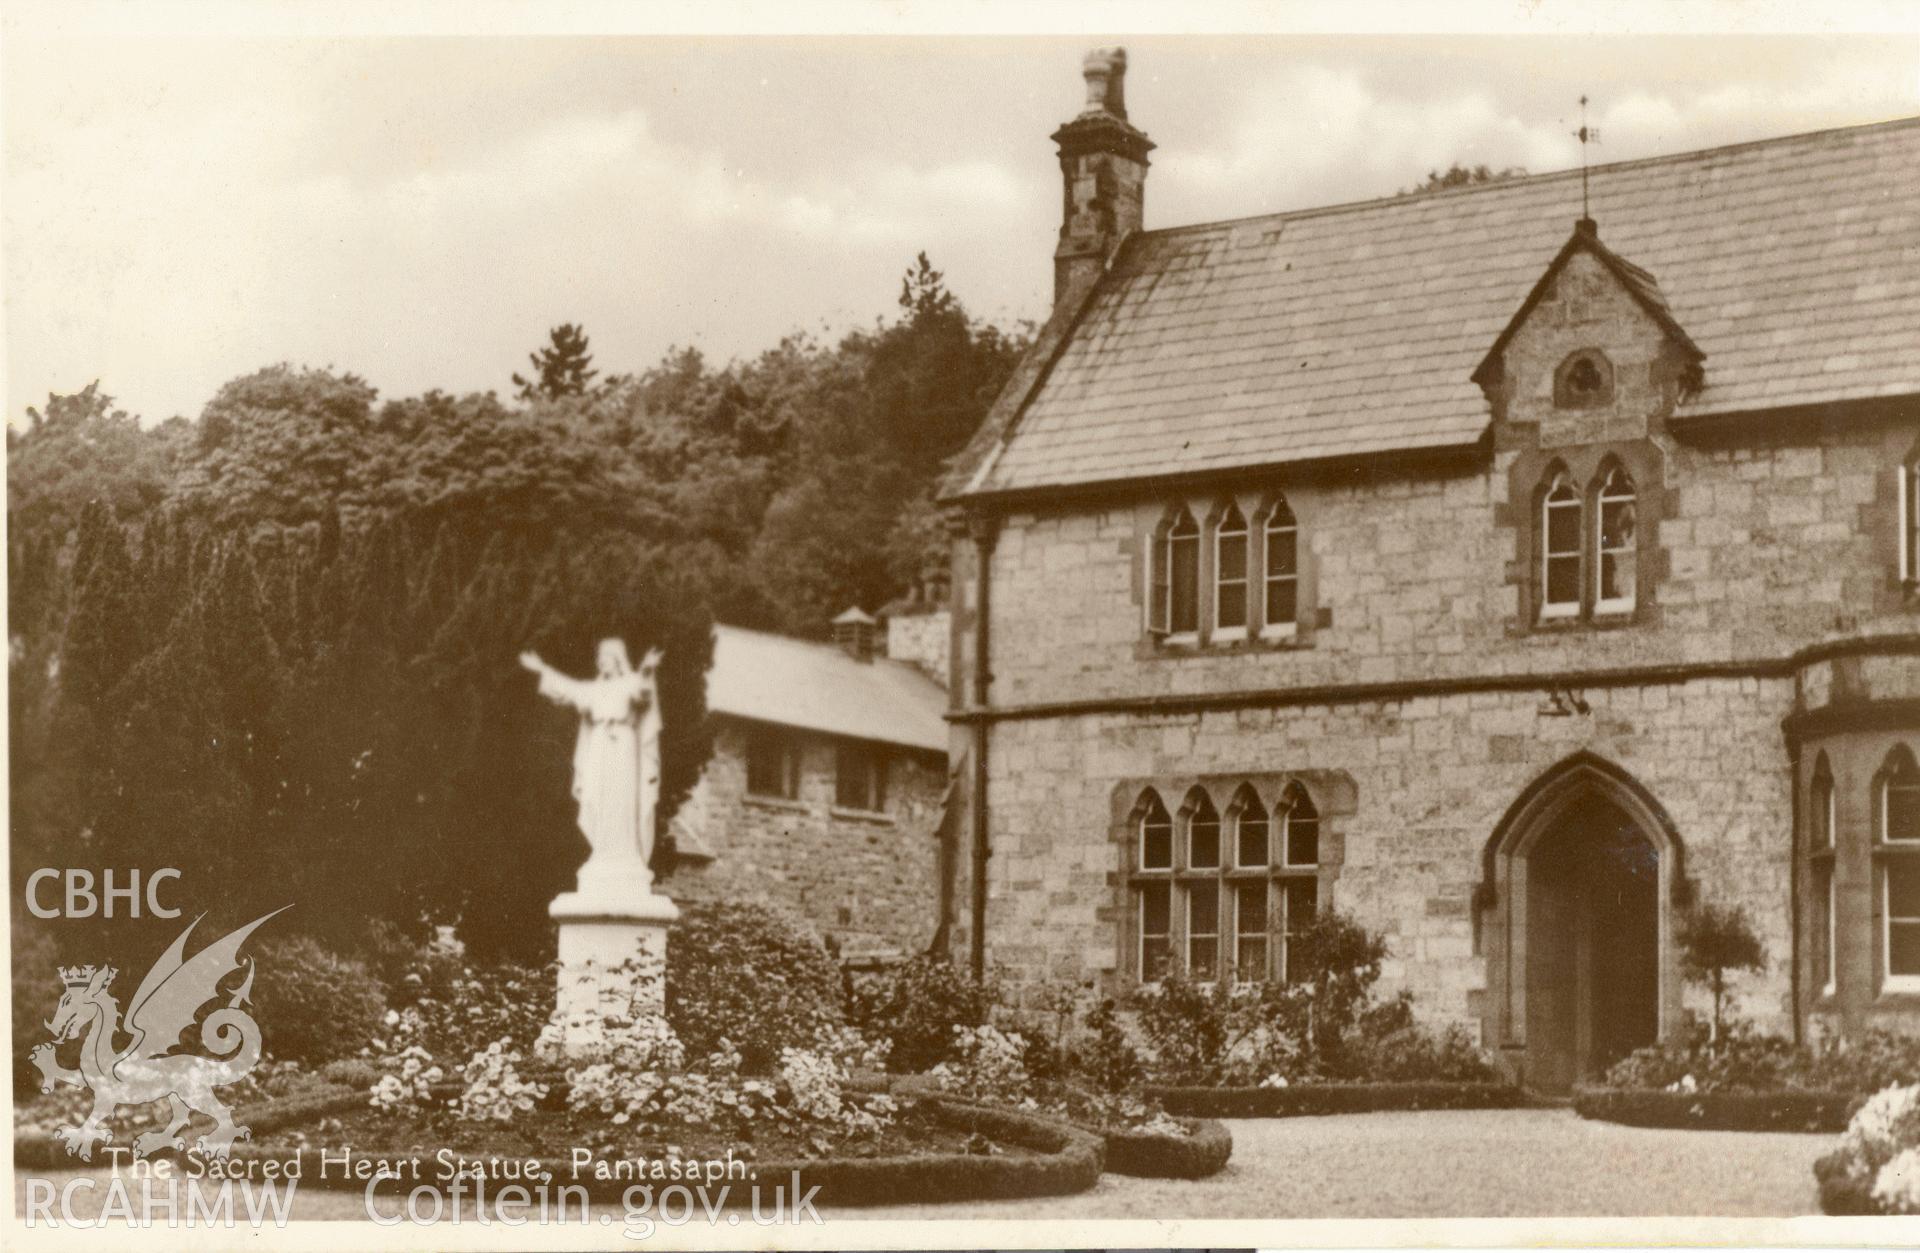 Digitised postcard image of the Sacred Heart, Franciscan Friary, Pantasaph. Produced by Parks and Gardens Data Services, from an original item in the Peter Davis Collection at Parks and Gardens UK. We hold only web-resolution images of this collection, suitable for viewing on screen and for research purposes only. We do not hold the original images, or publication quality scans.